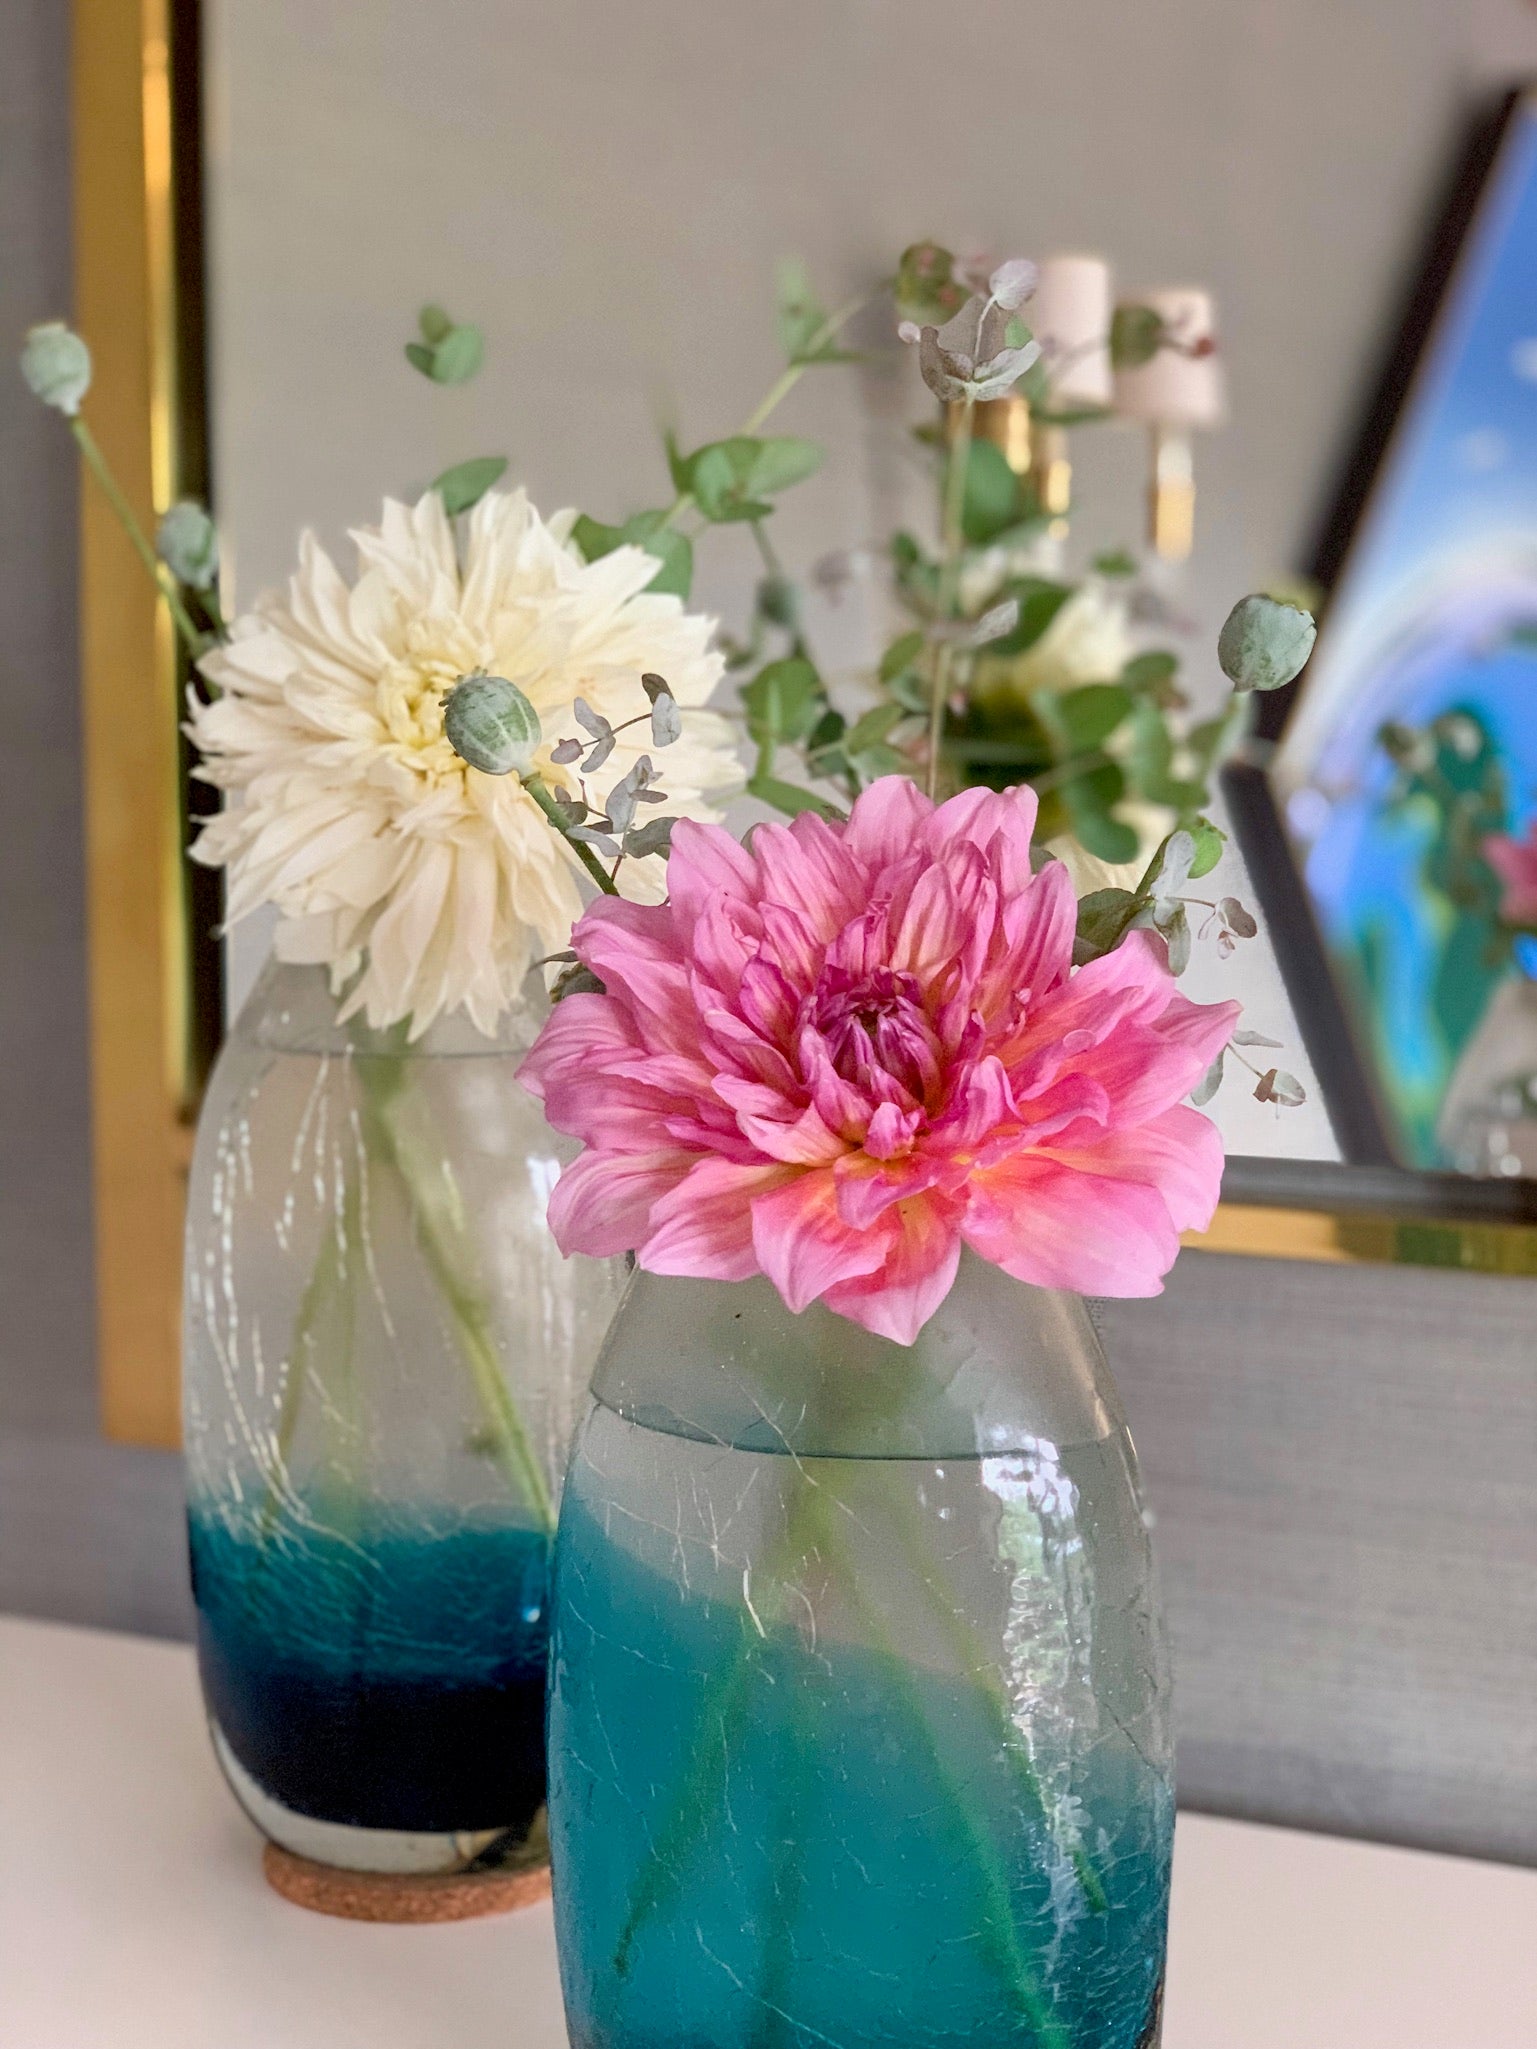 Davis Designs has the most gorgeous summer flower arrangements to impress guests and beautify your home without making any major design changes. Get inspired!